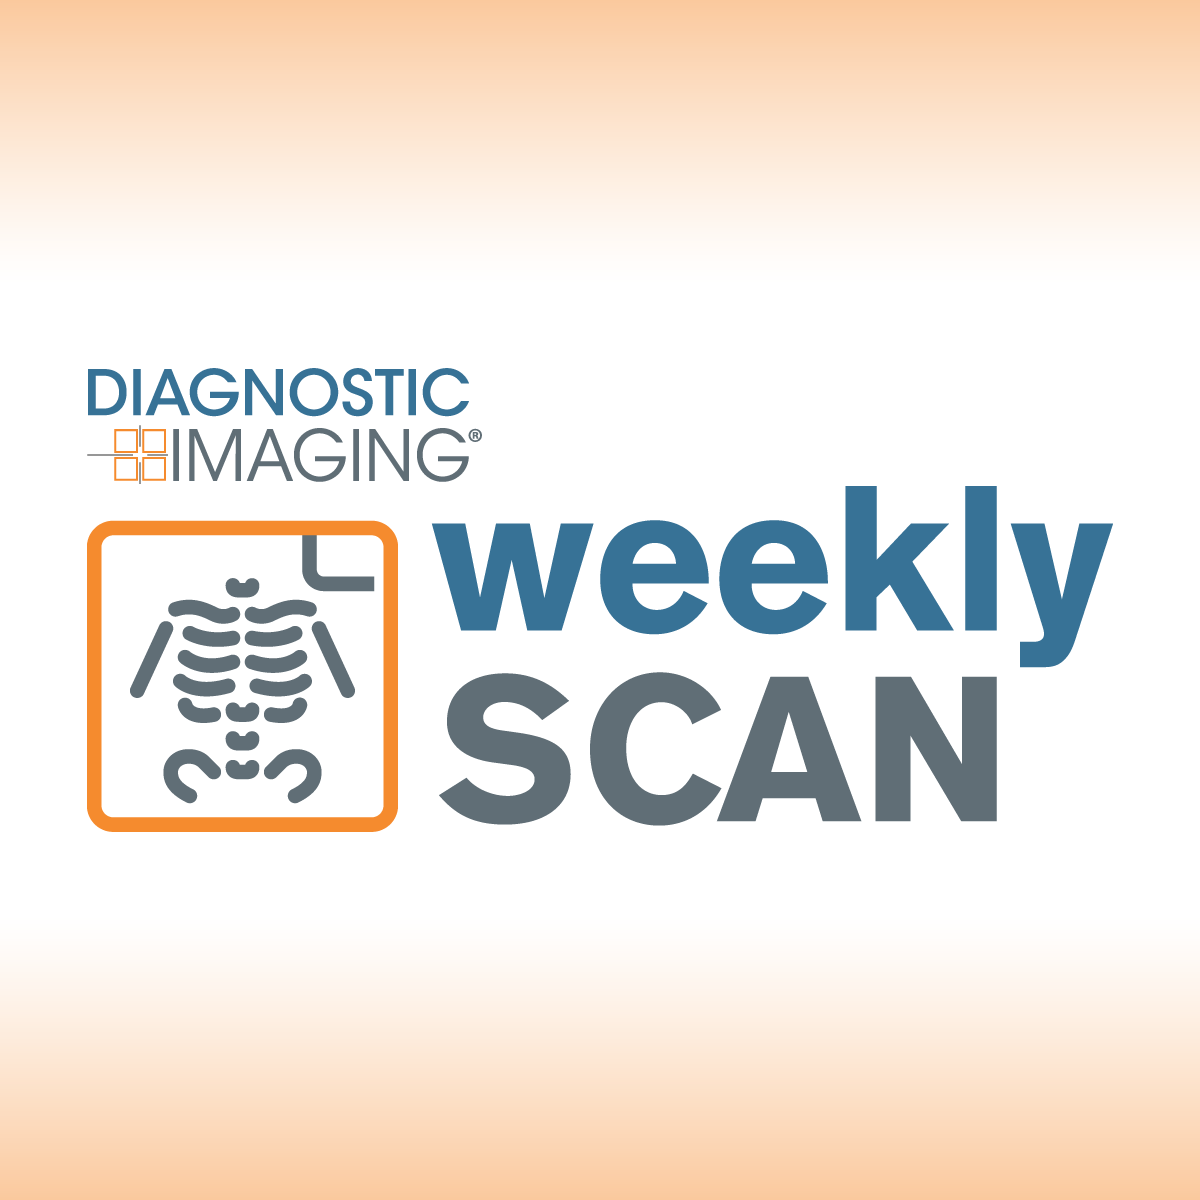 Diagnostic Imaging's Weekly Scan: July 16-22